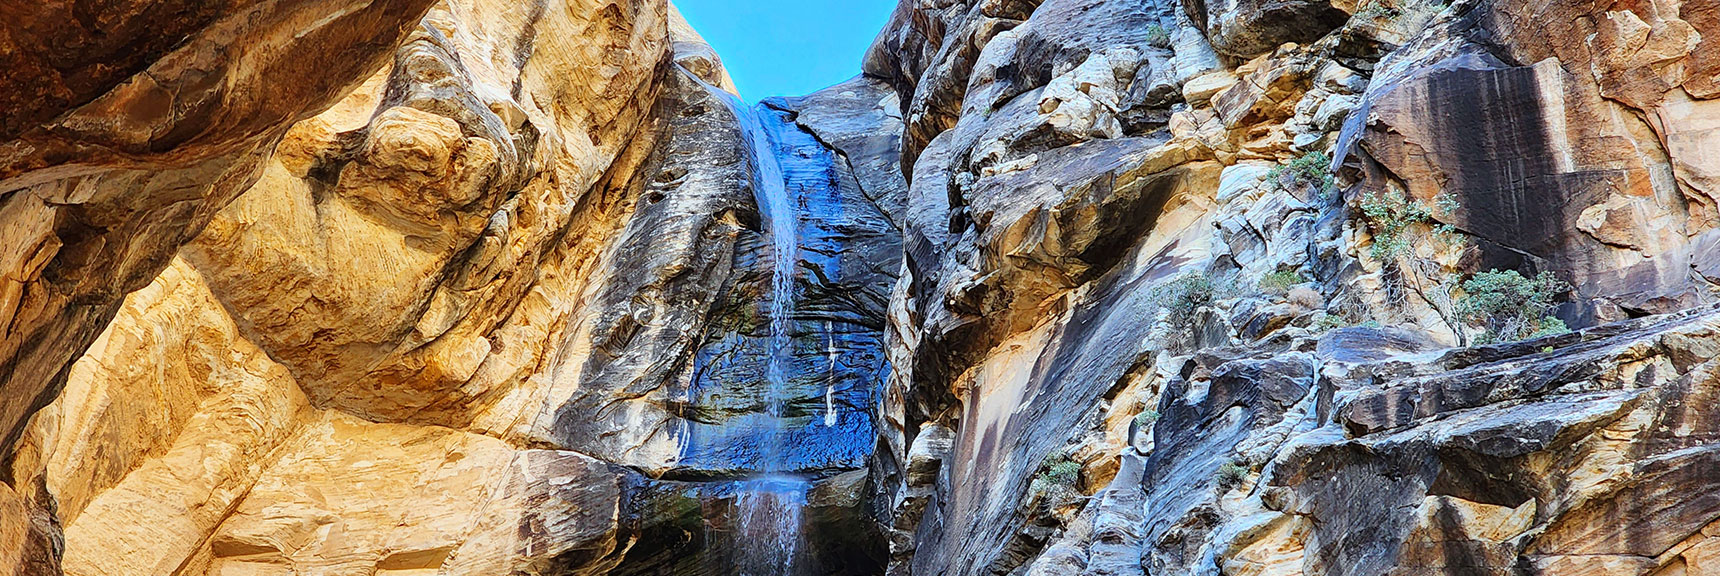 Waterfall at the Upper End of the Route Through Ice Box Canyon | Ice Box Canyon | Red Rock Canyon NCA, Nevada | Las Vegas Area Trails | David Smith